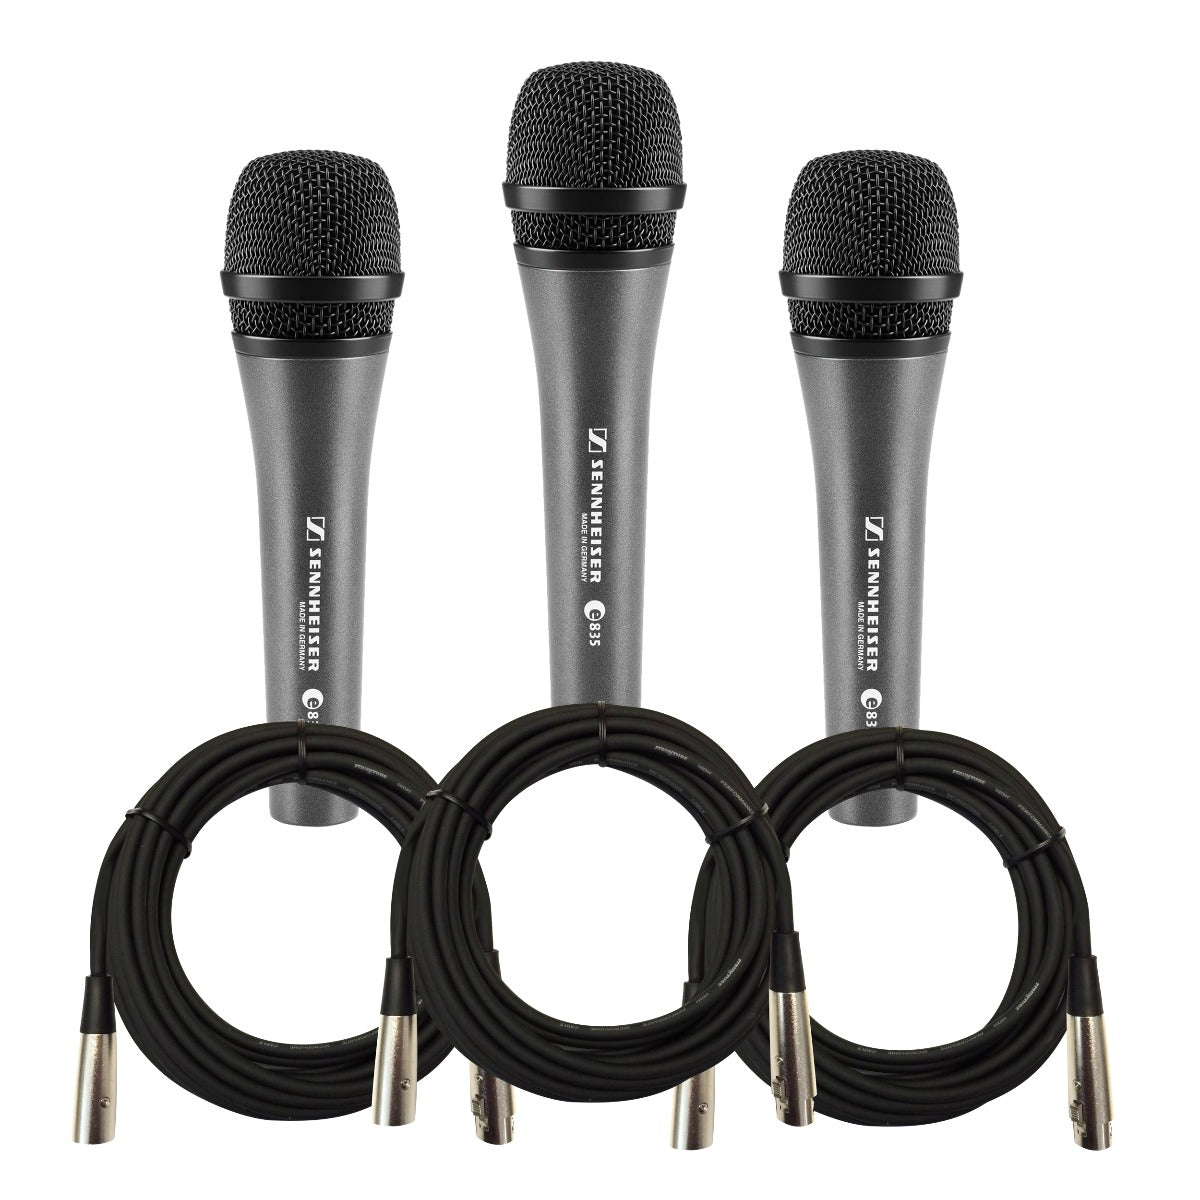 Sennheiser E 835 Dynamic Vocal Microphone - 3 Pack CABLE KIT